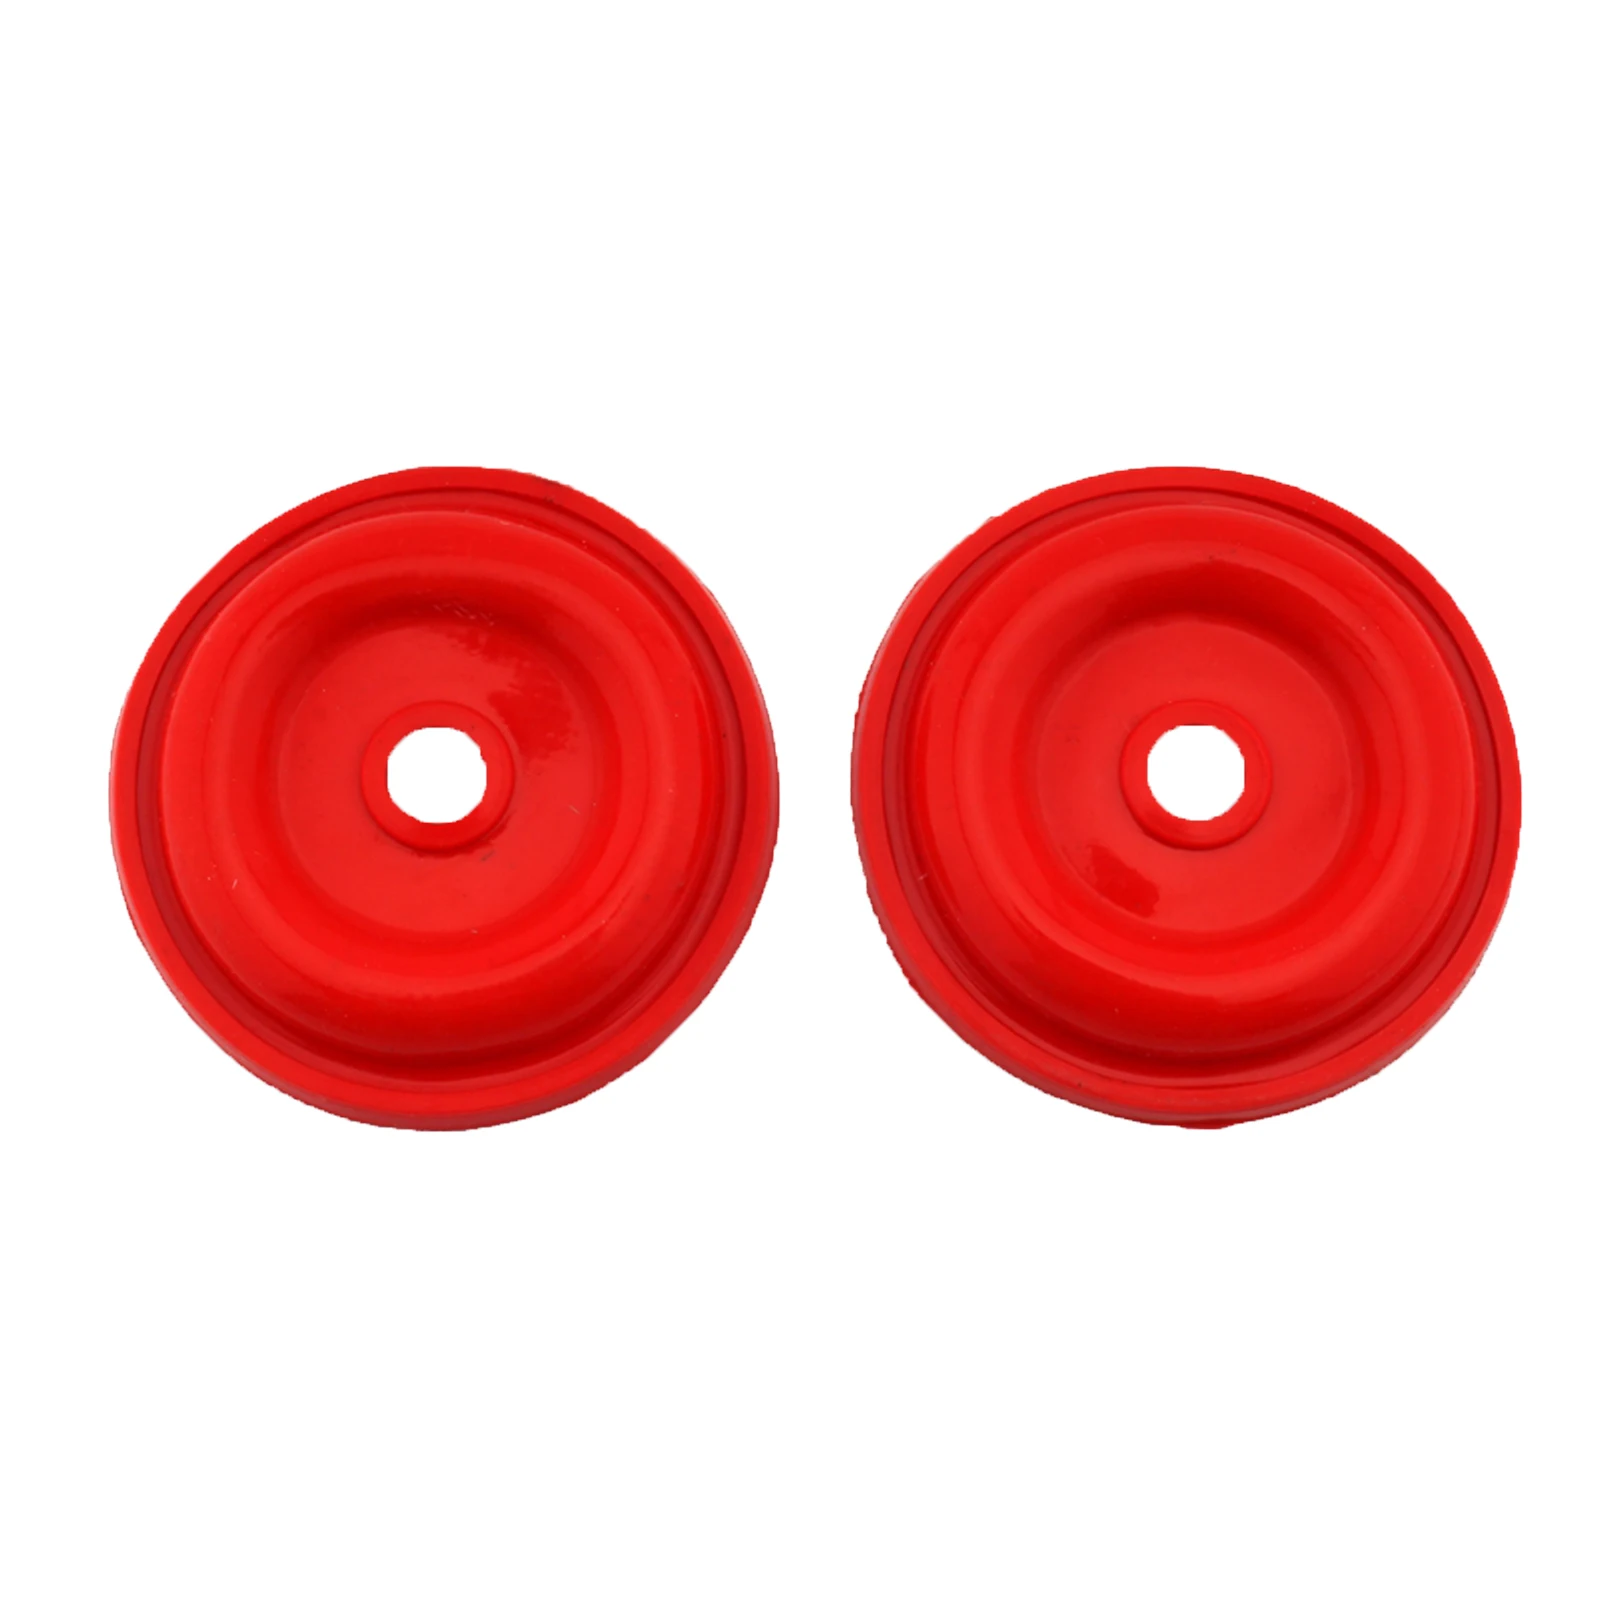 2 Packs Exhaust Valve Bellows Replacements 5412379 for Polaris Snowmobiles 440 to 900 Boat Accessories Red